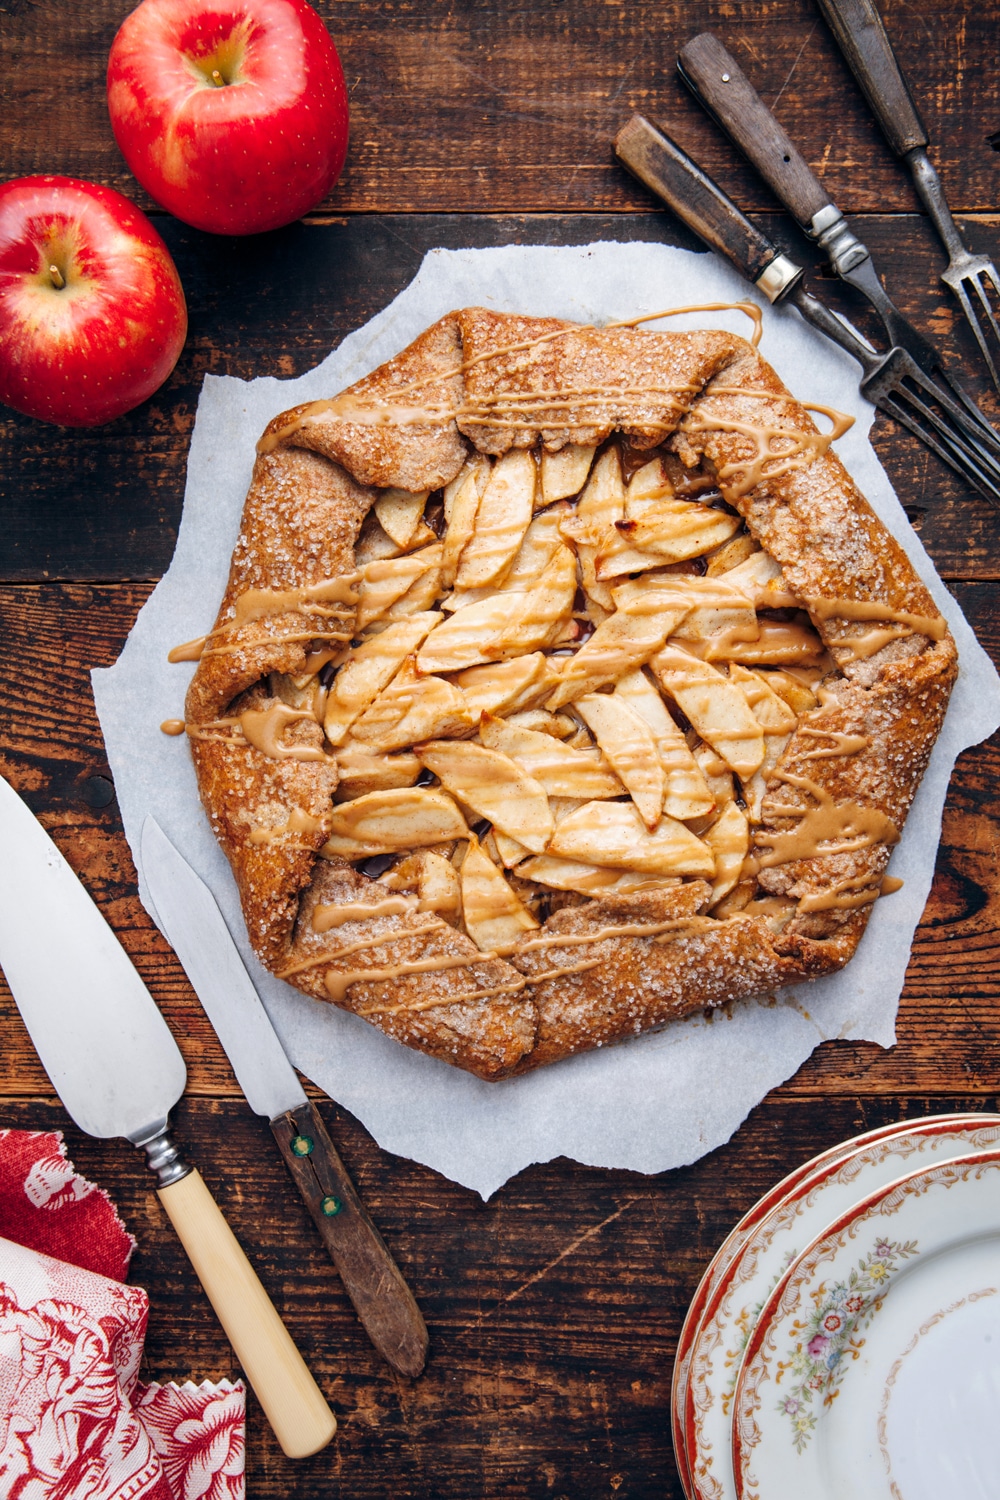 Spicy apple galette with coffee glaze on a wooden table.